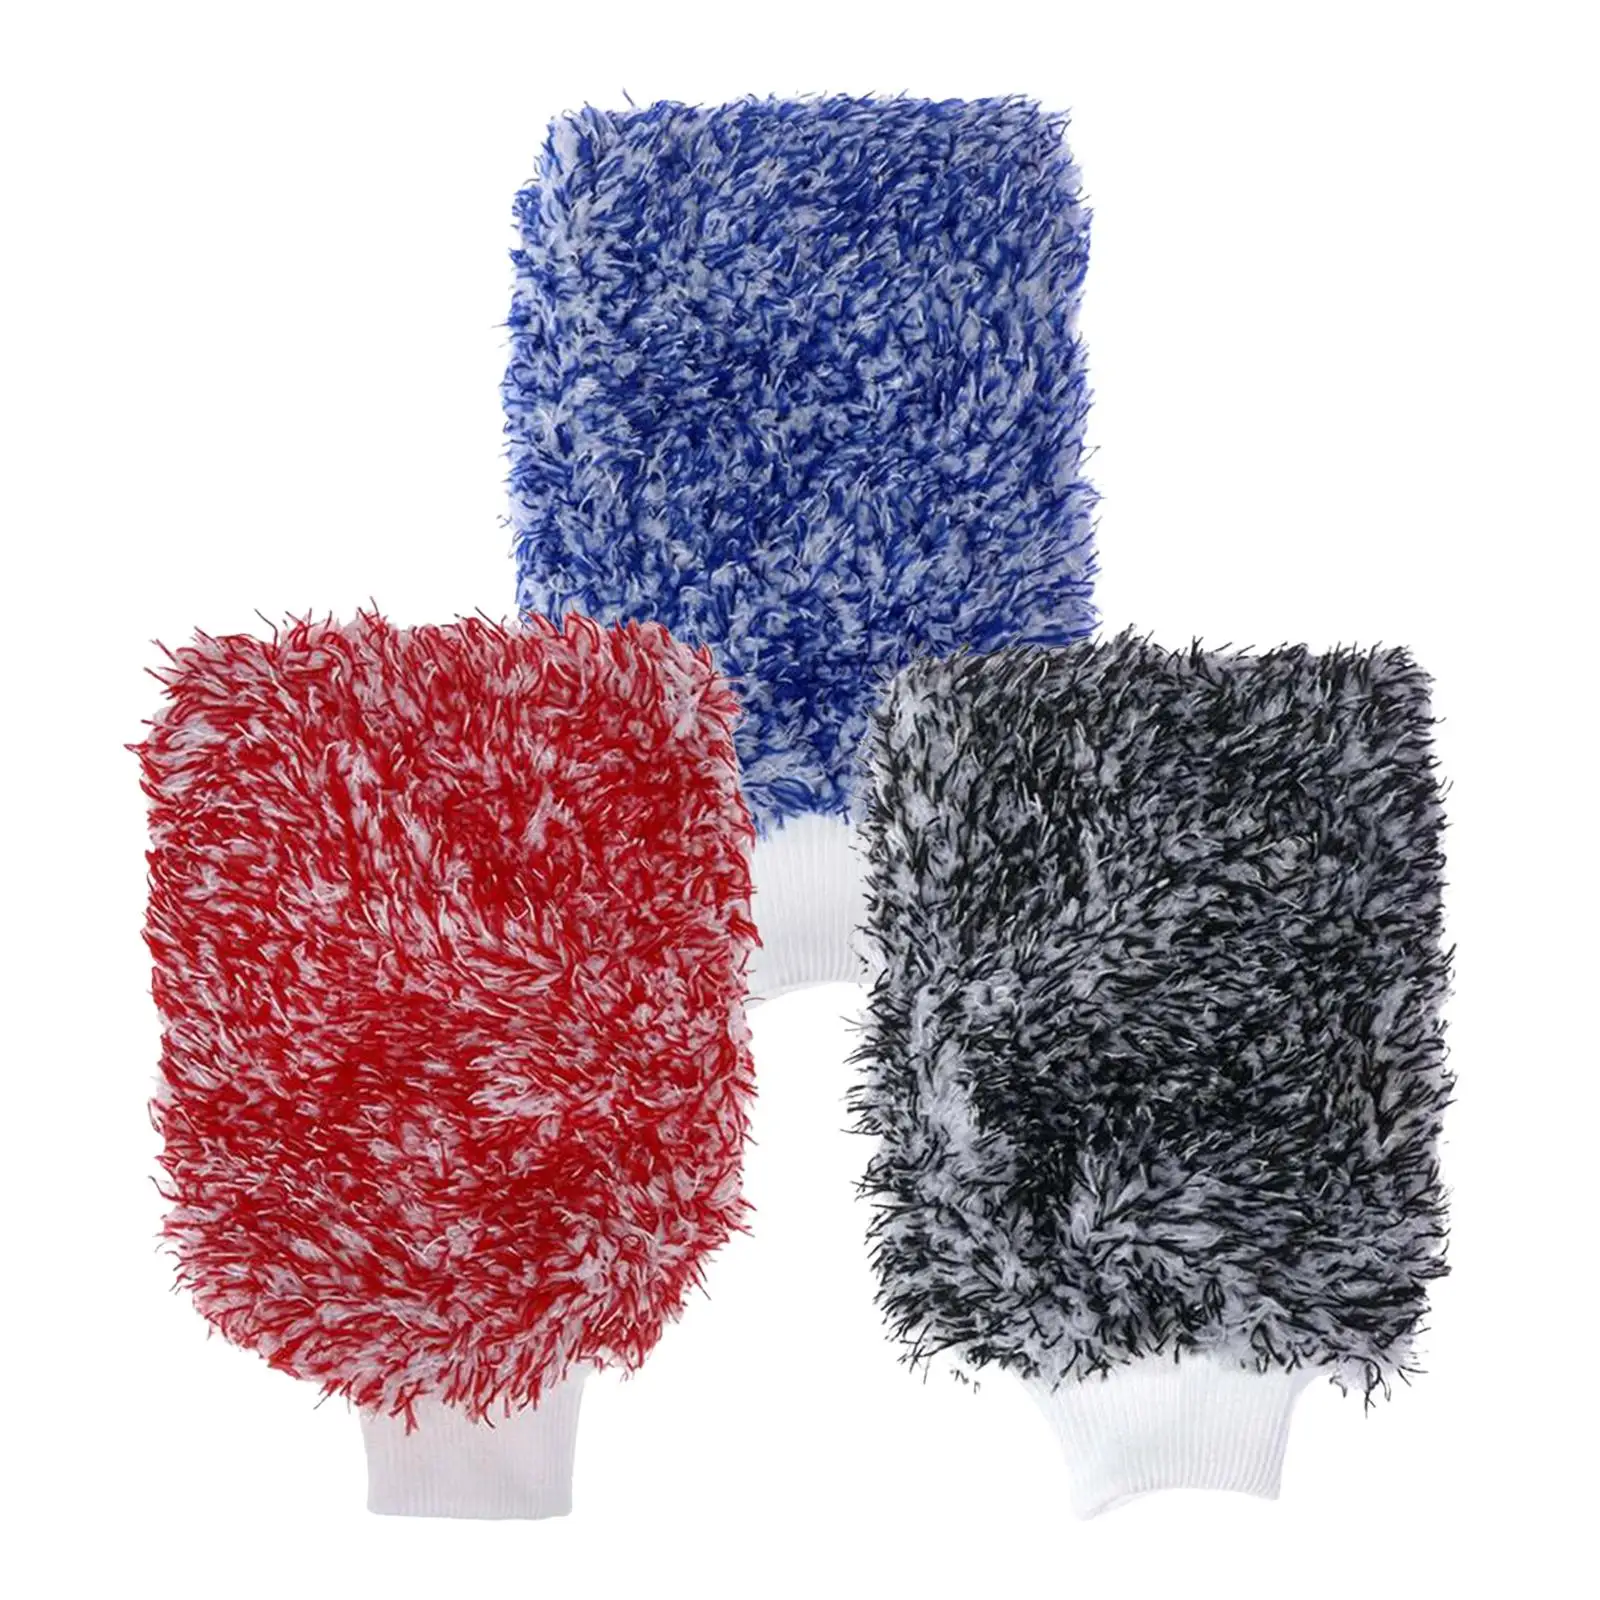 Car Wash Mitt Microfiber Scratch Free Effective Washing Soft Washing Glove for Motorcycles Trucks Boats Automotives Cars